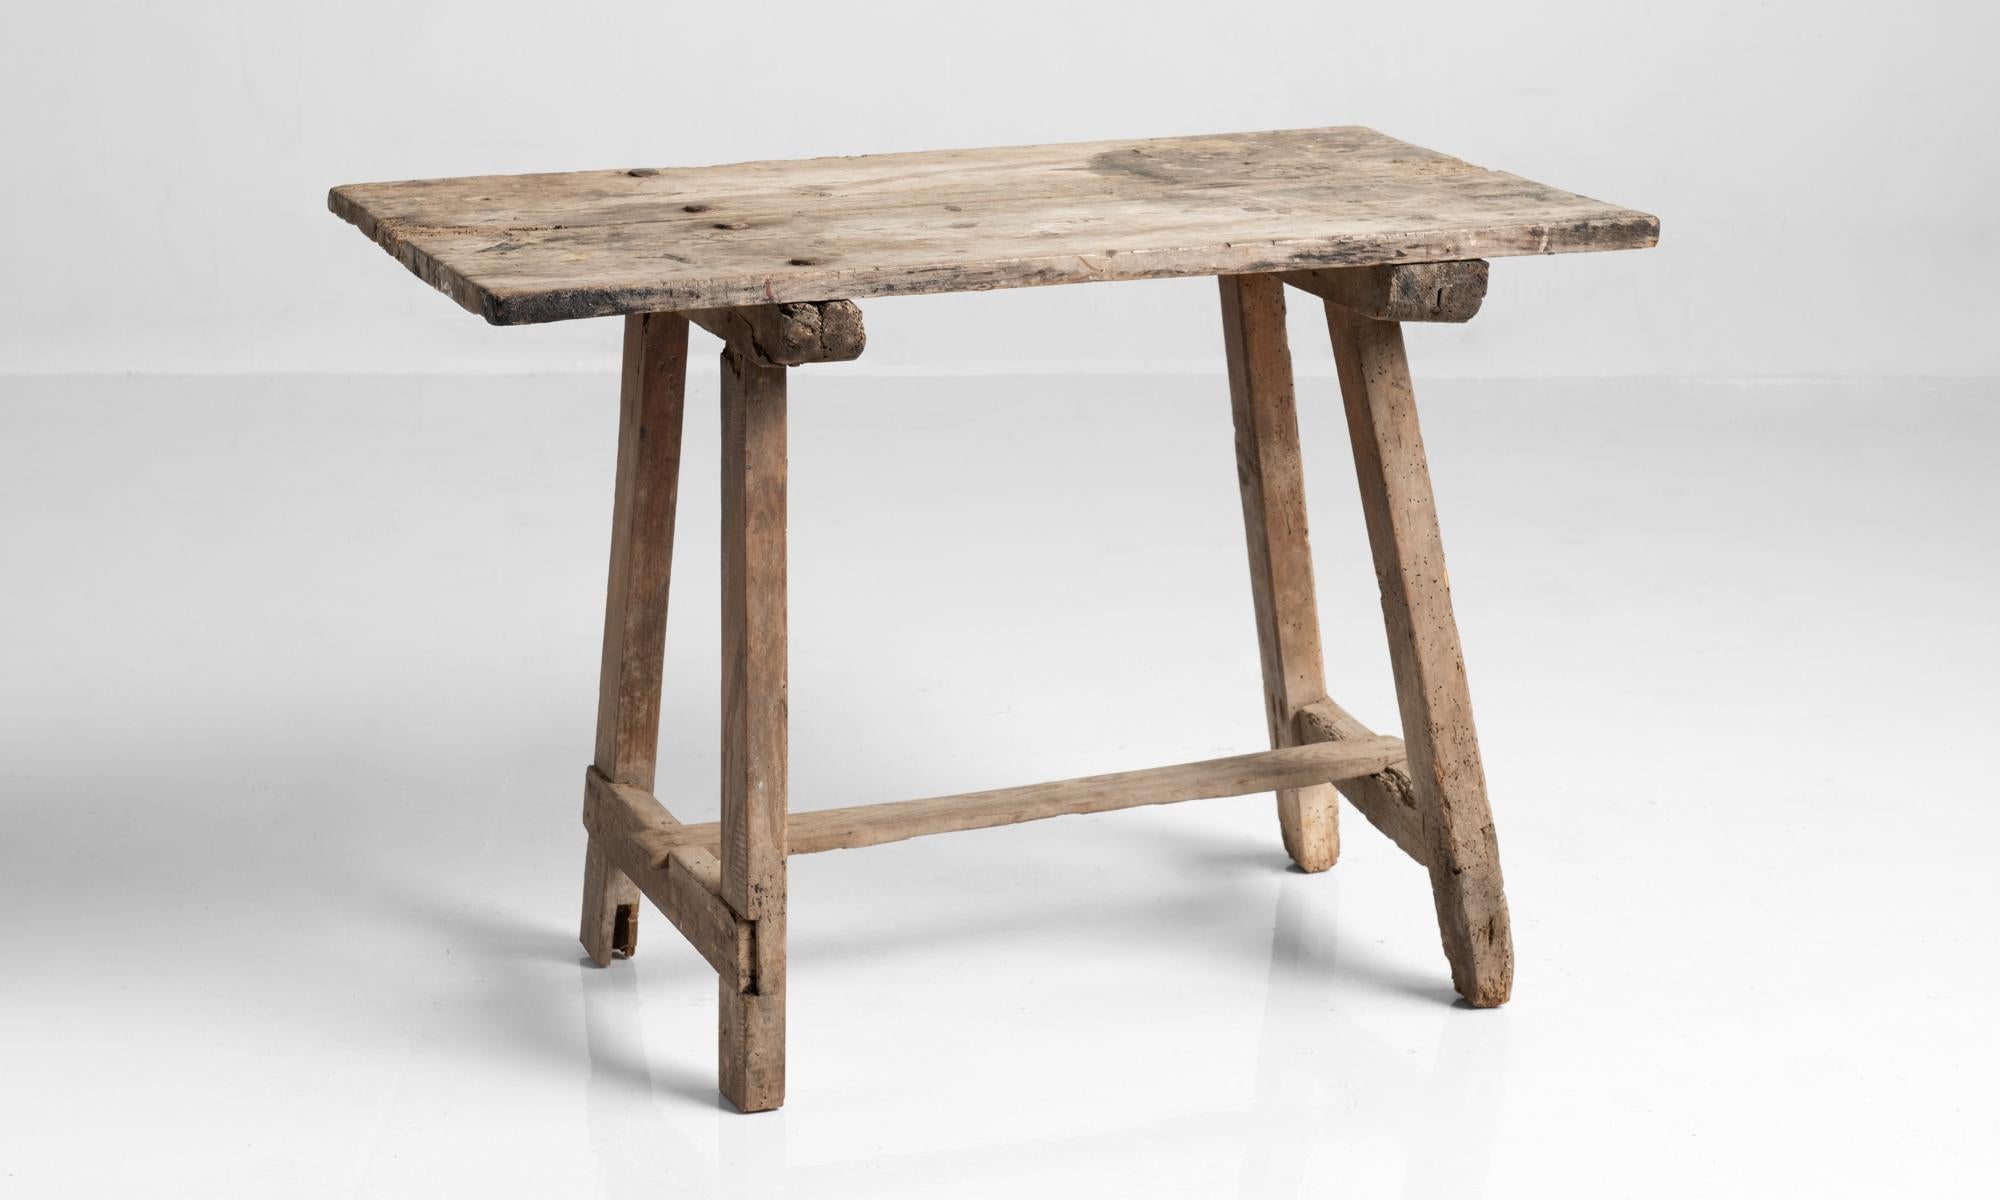 Primitive country table, England, circa 1890.

Beautifully patinated form with stretcher support.